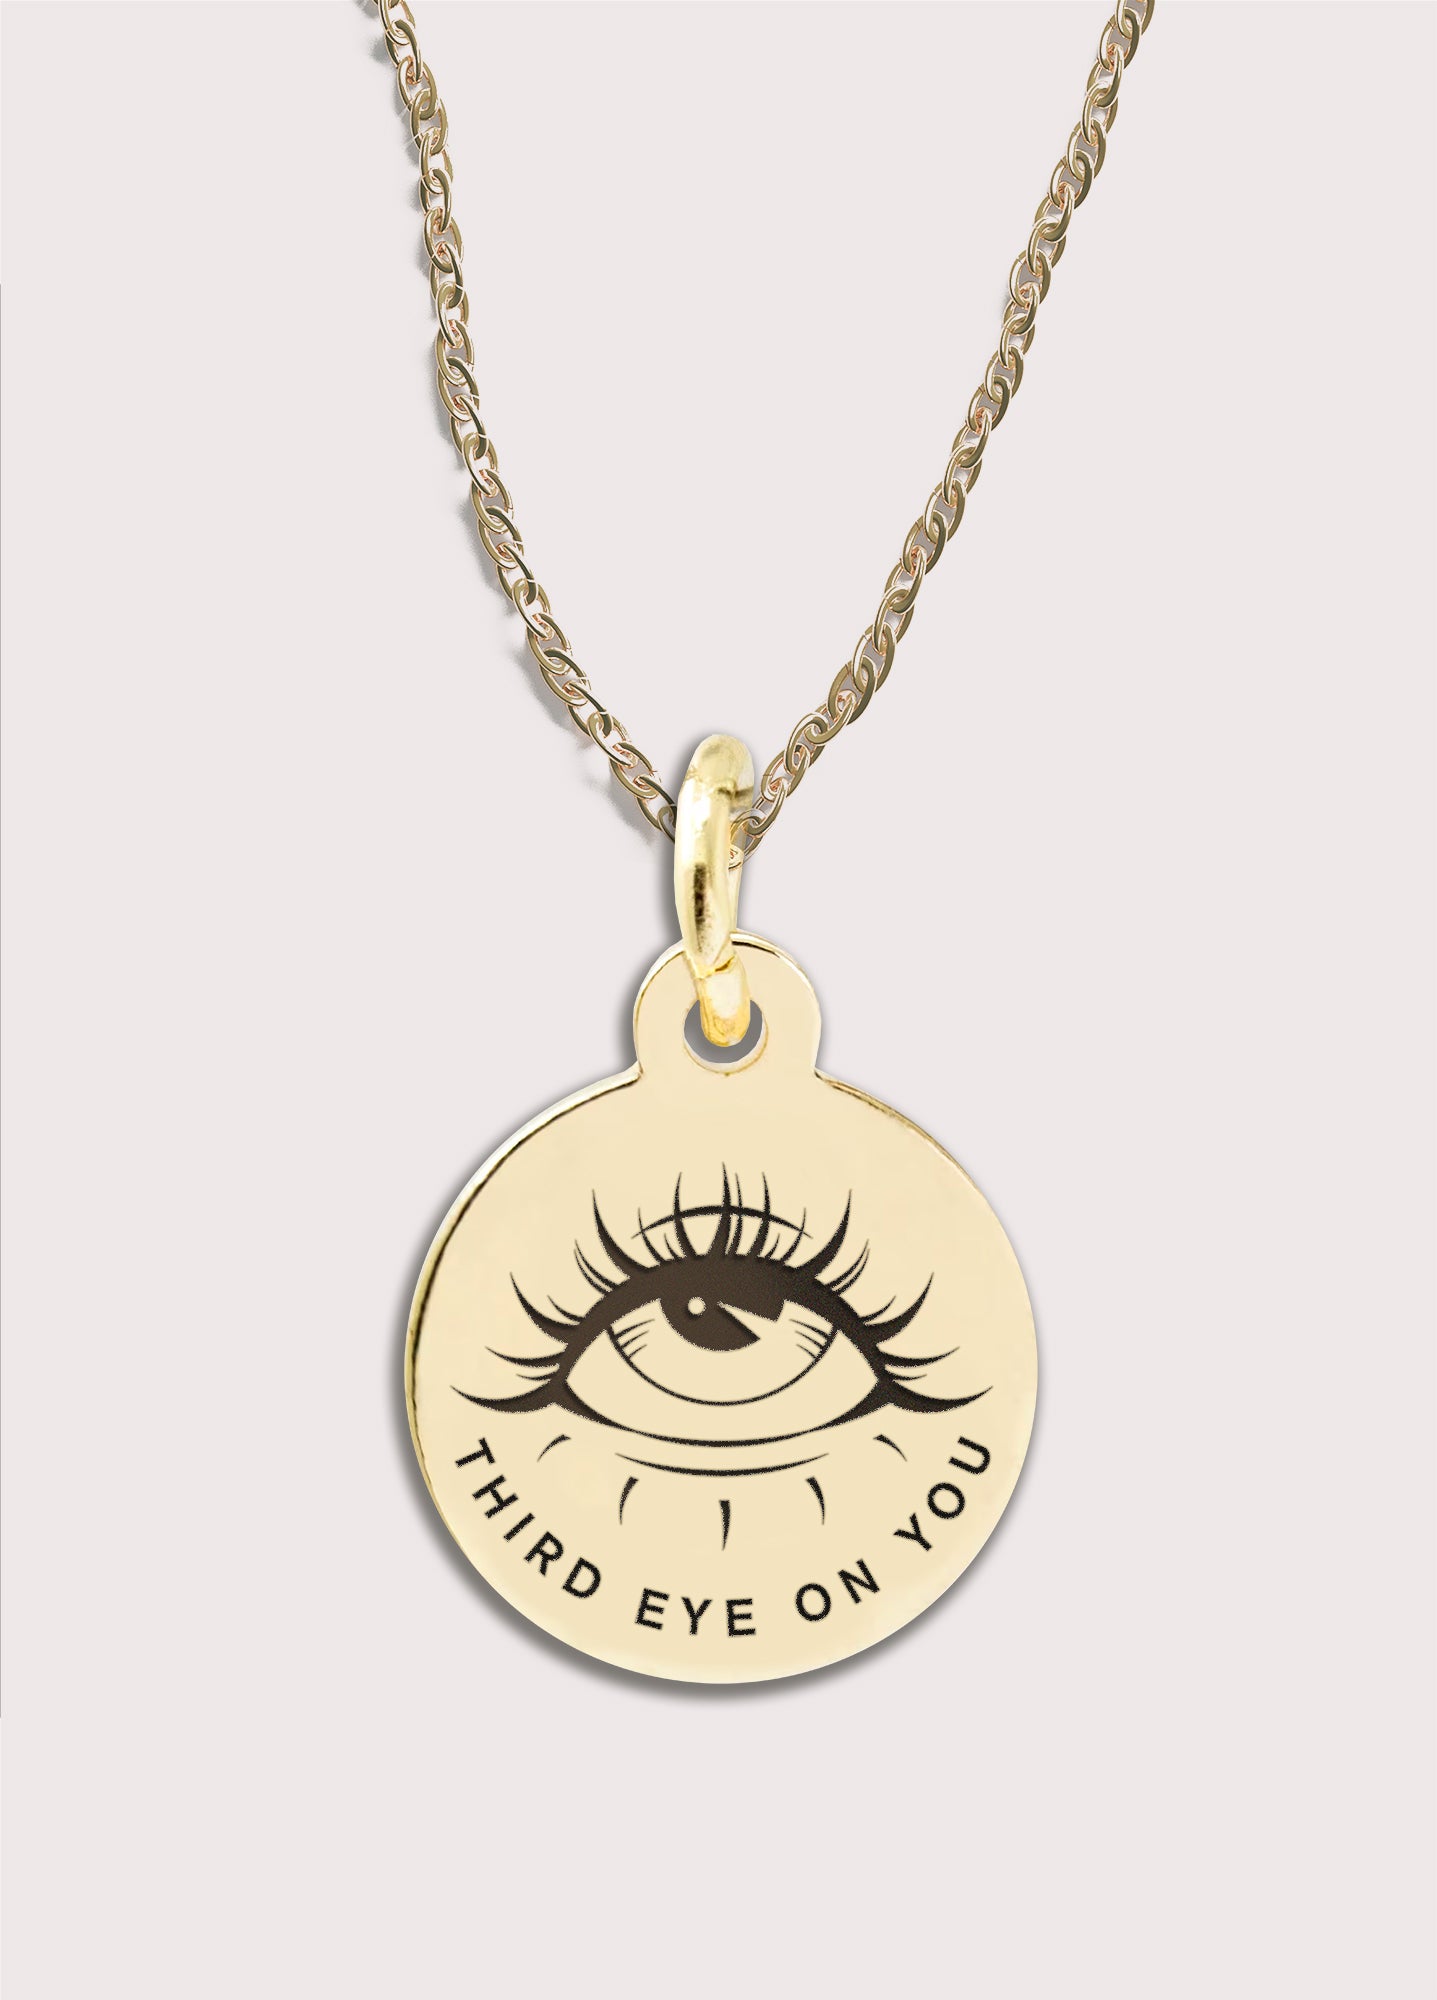 Third Eye on You, Gold Necklace